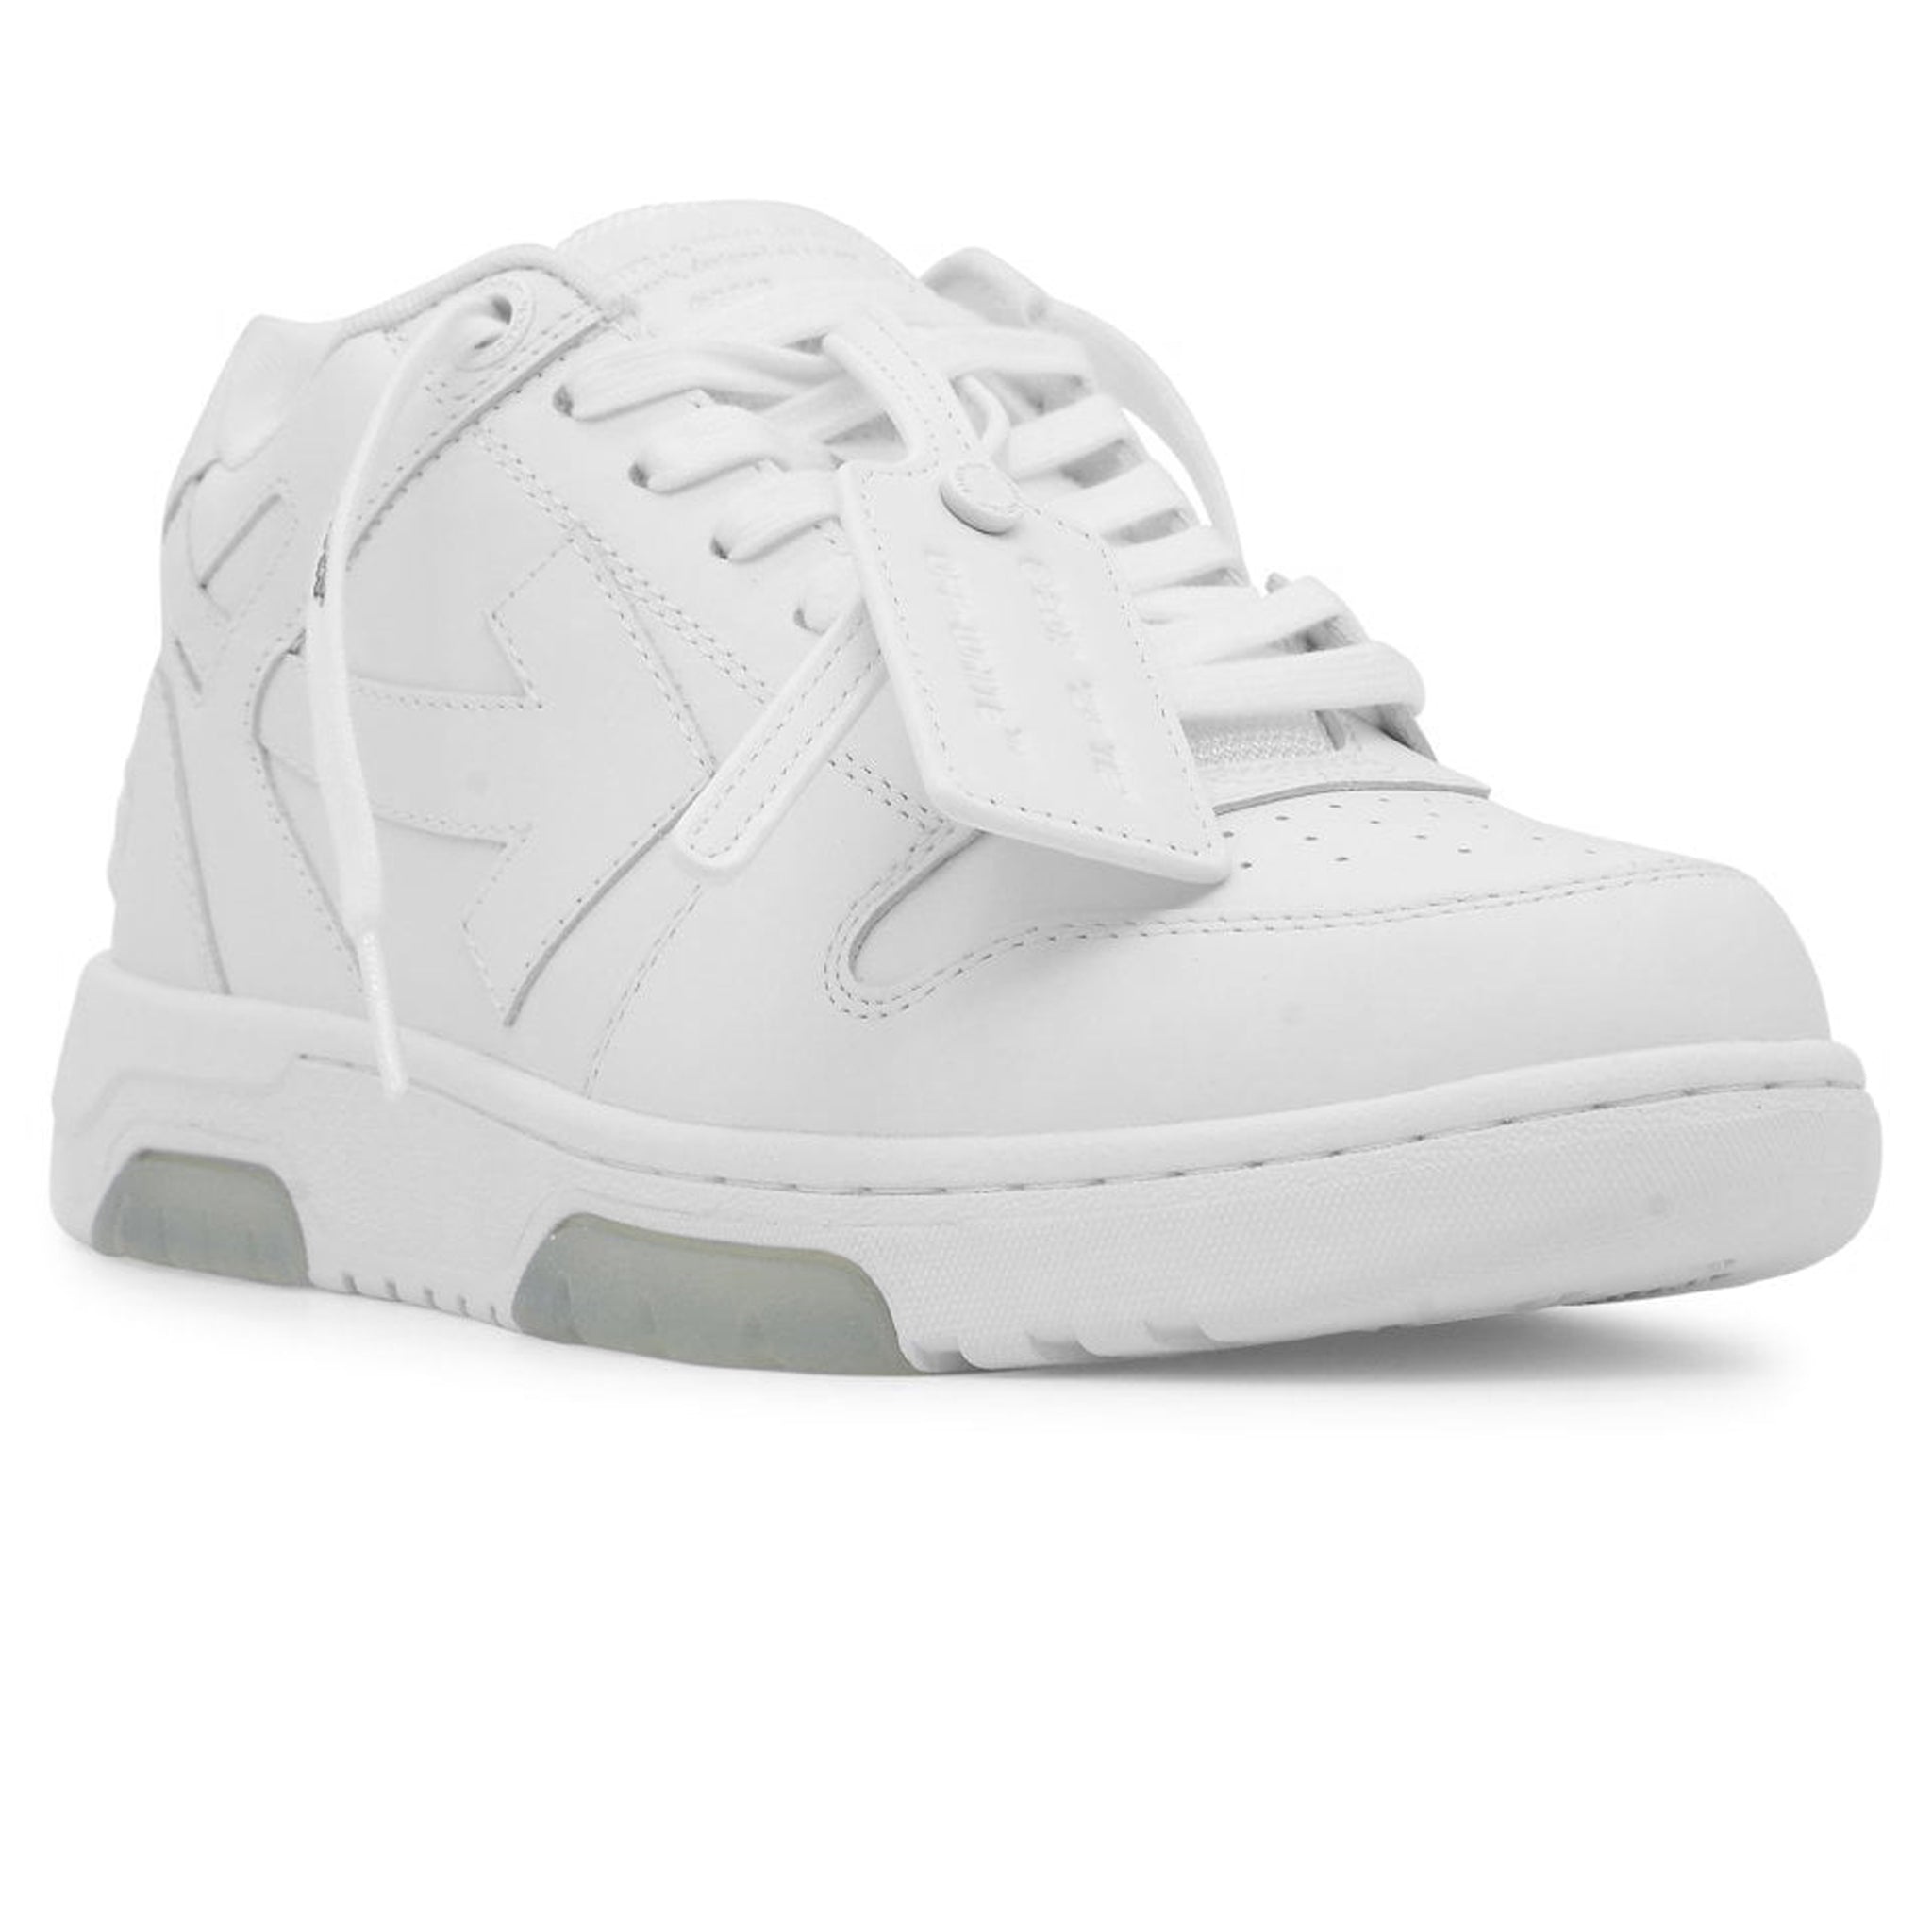 NIKE AIR FORCE 1 LOW VT PRM WHITEOUT 高質で安価 - 靴